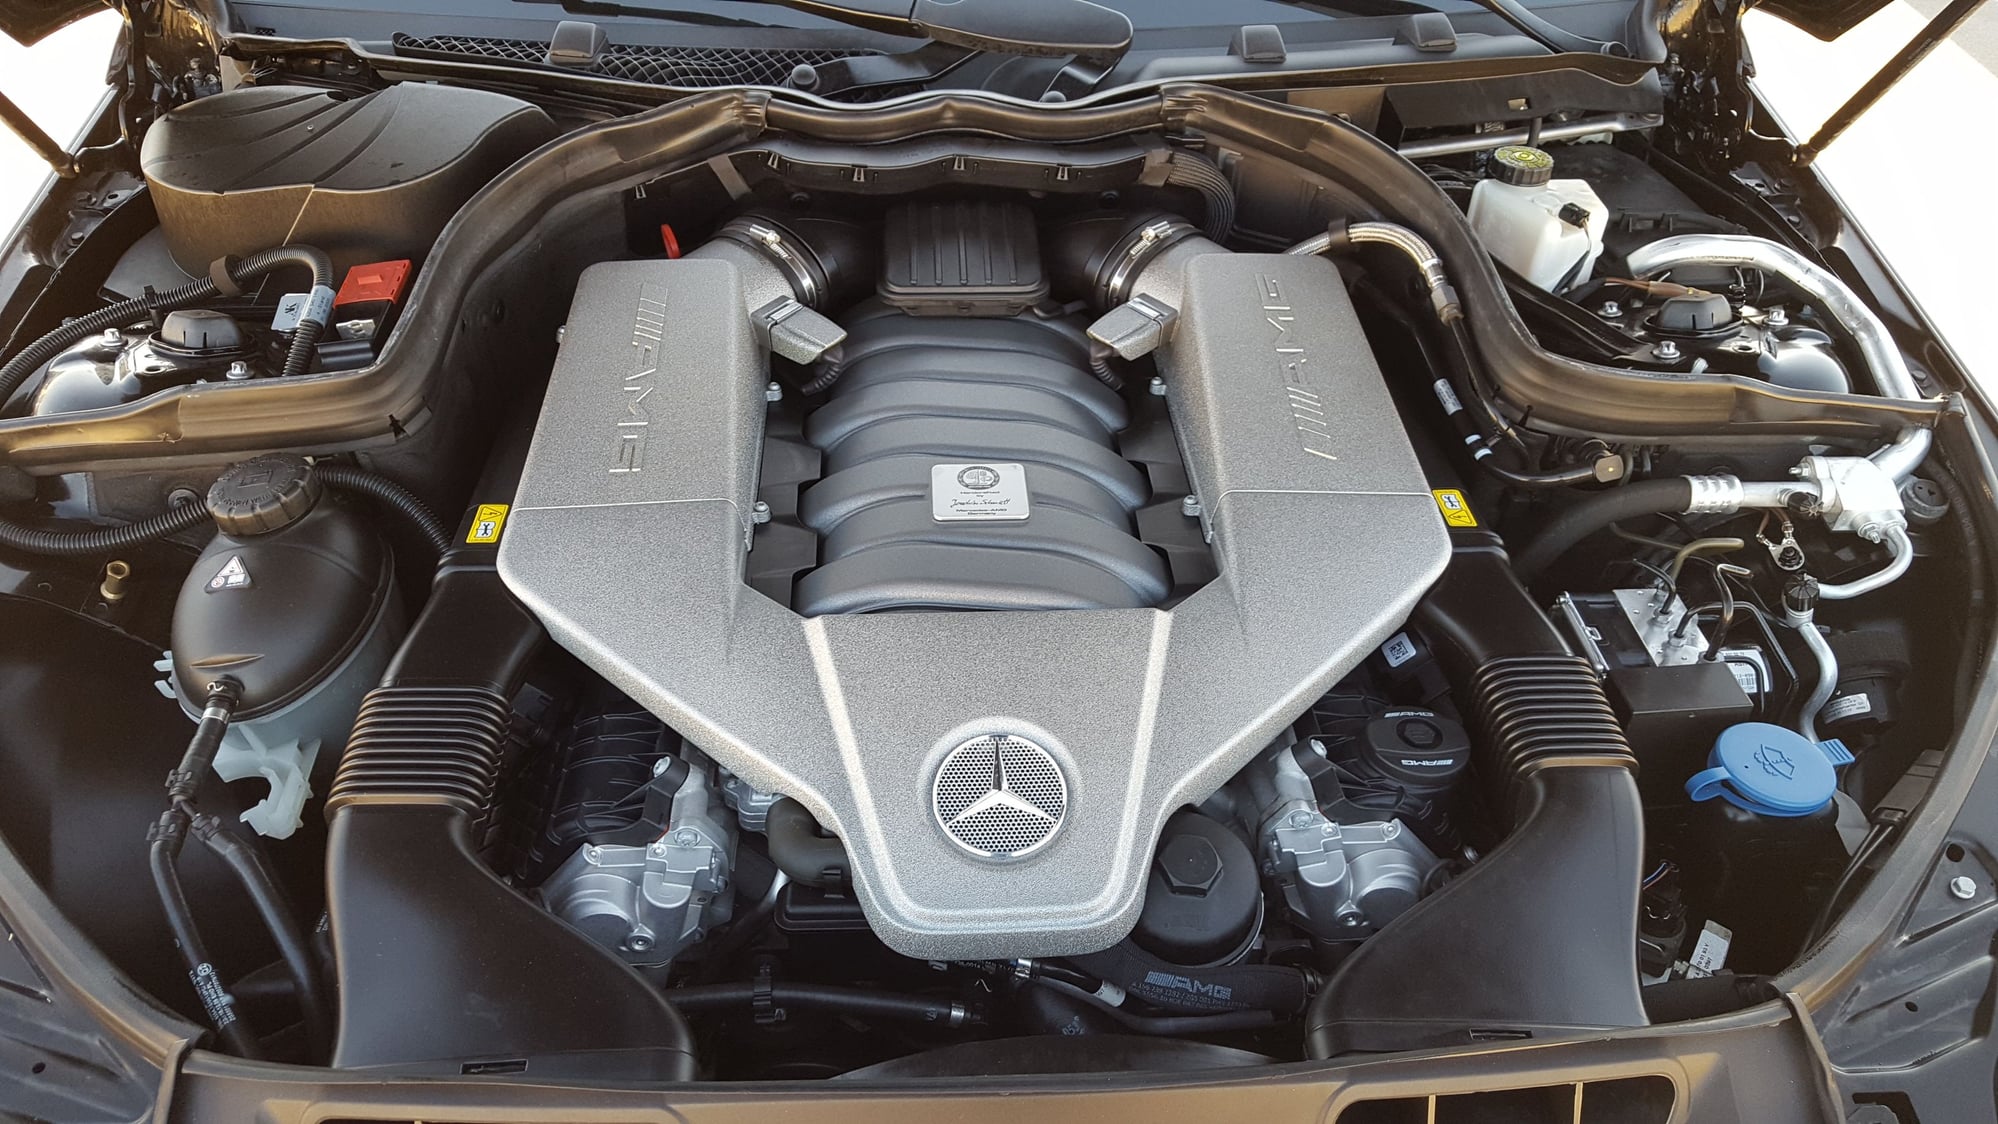 2013 Mercedes-Benz C63 AMG - 2013 C63 P31, 40k miles, meticulously serviced, good condition, loaded w/ options - Used - VIN WDDGF7HB8DA833904 - 40,000 Miles - 8 cyl - 2WD - Automatic - Sedan - Black - Charlotte, NC 29707, United States